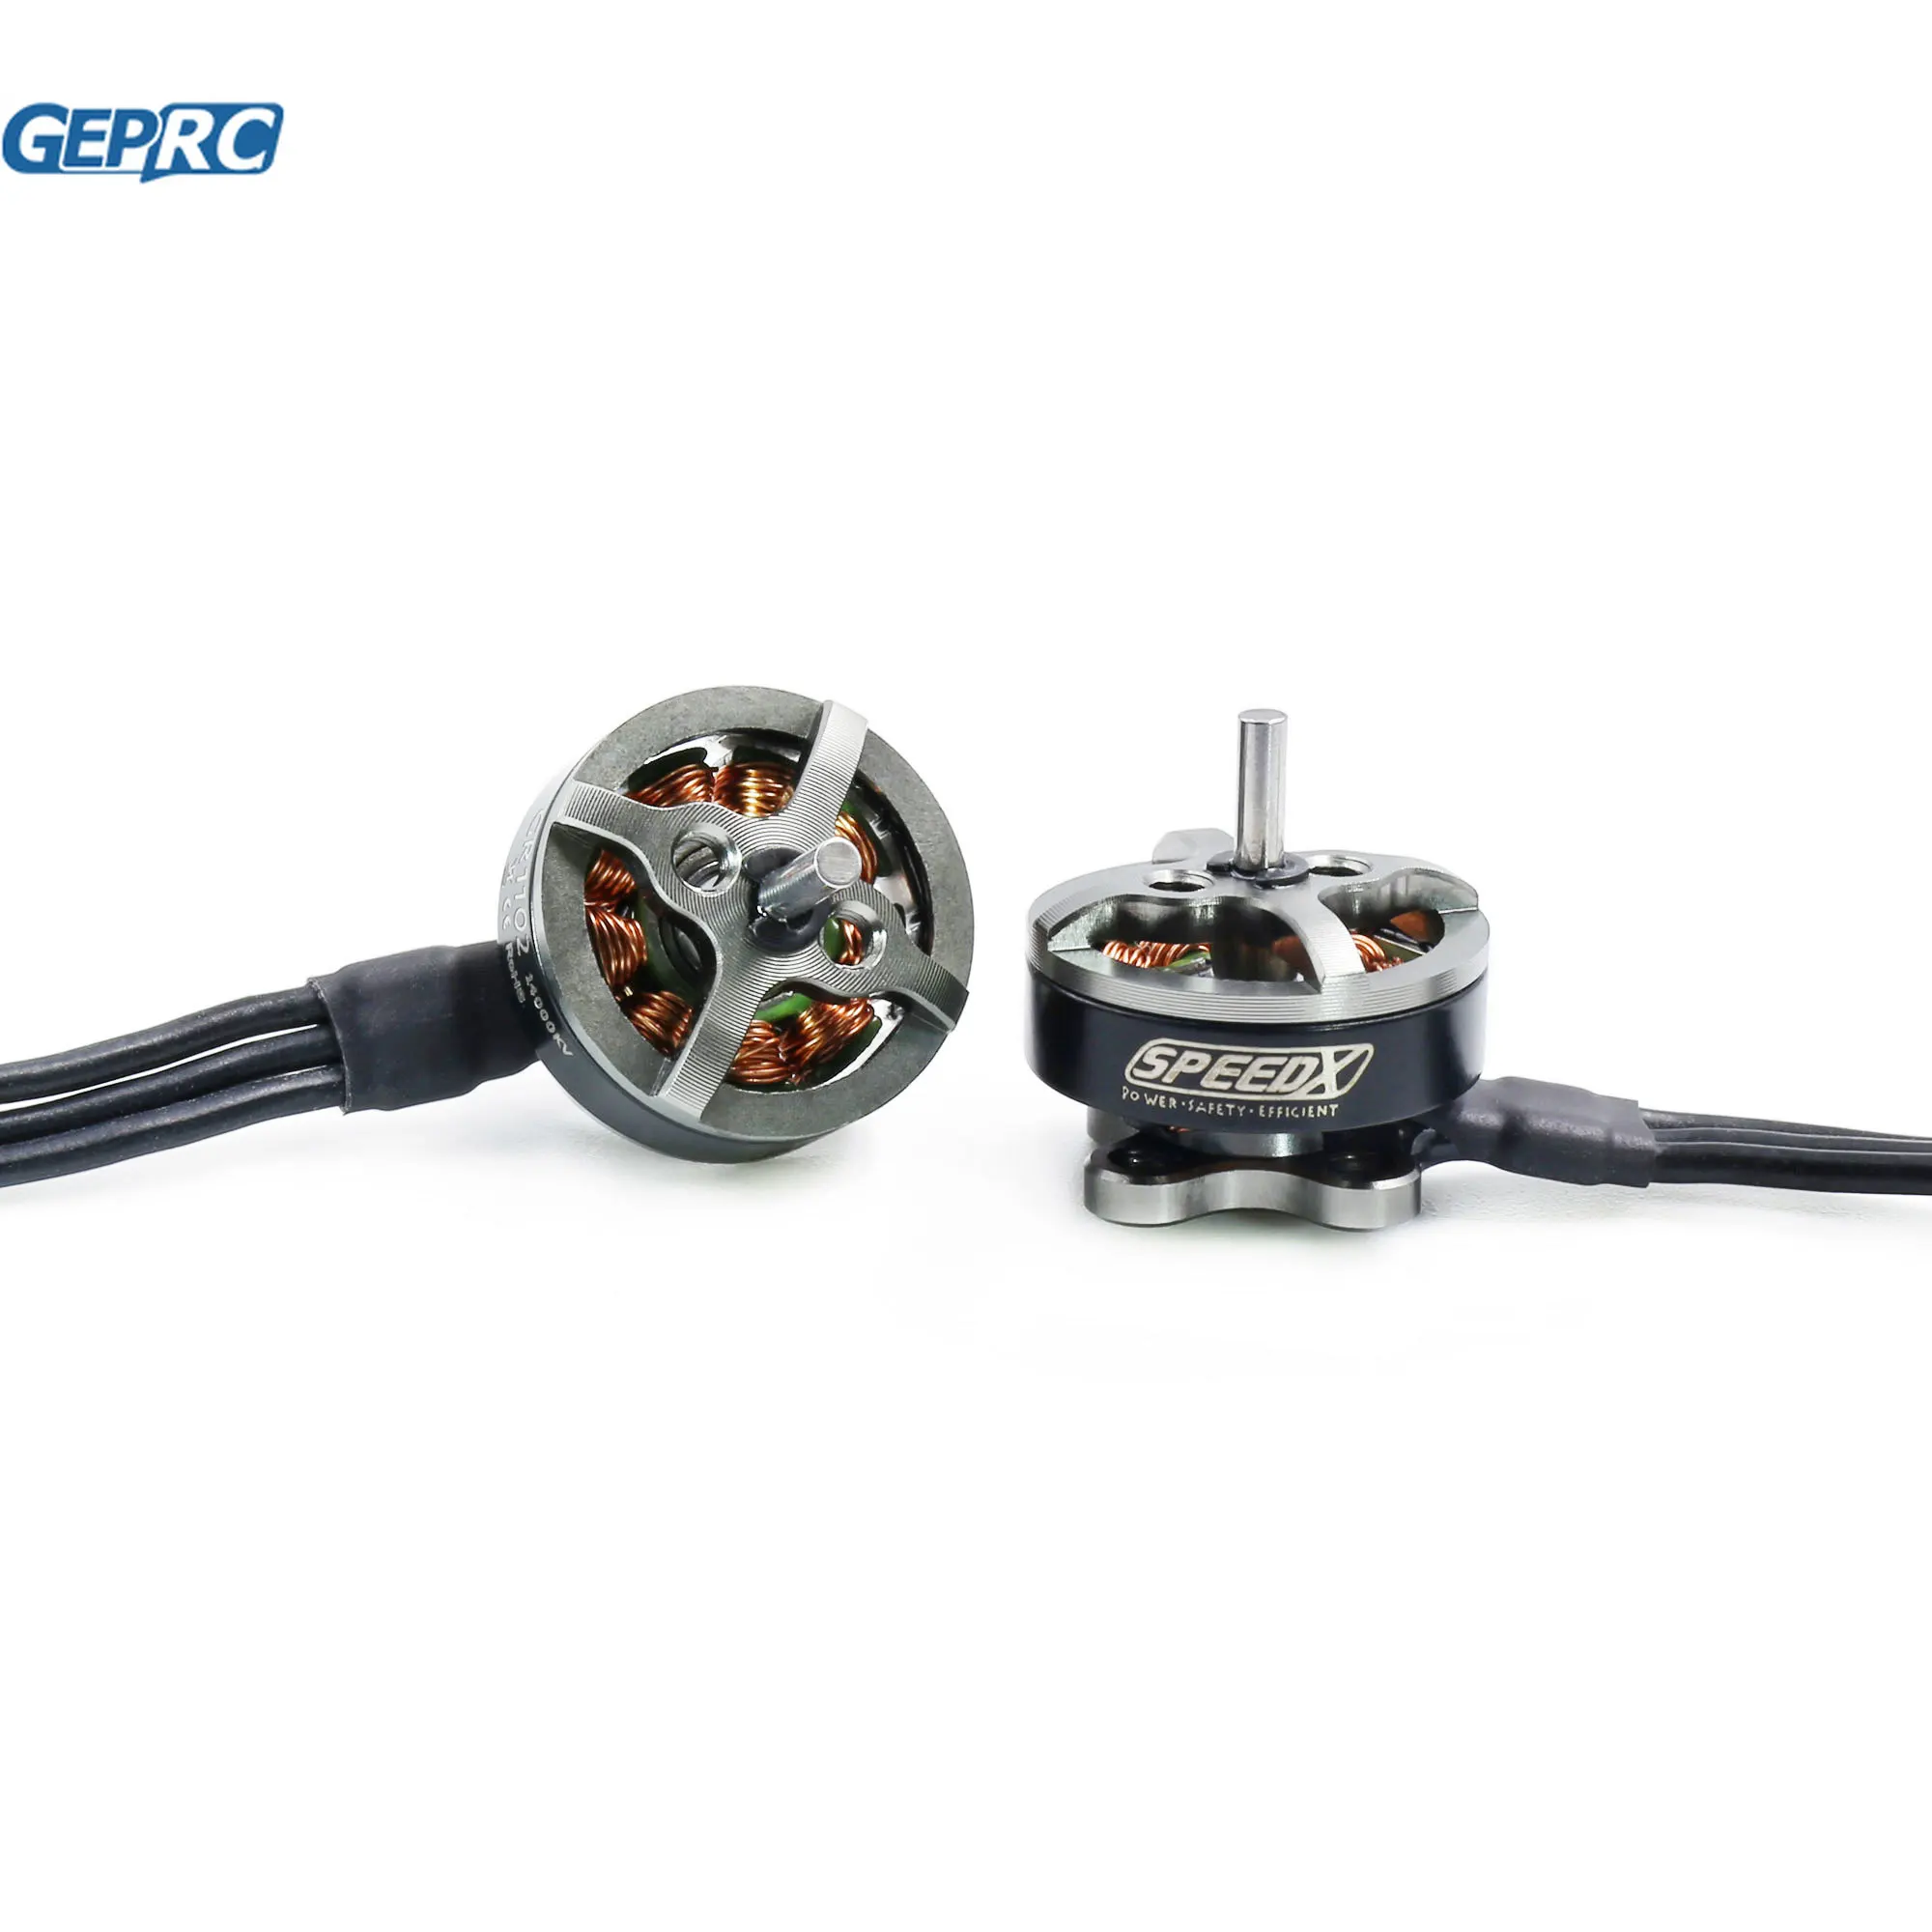 GEPRC GR1102 1102 10000KV 2S 9000KV 3S Brushless Motor 1.5mm Shaft for TinyGO CineEye Tinywhoop Toothpick FPV Racing Drones 4